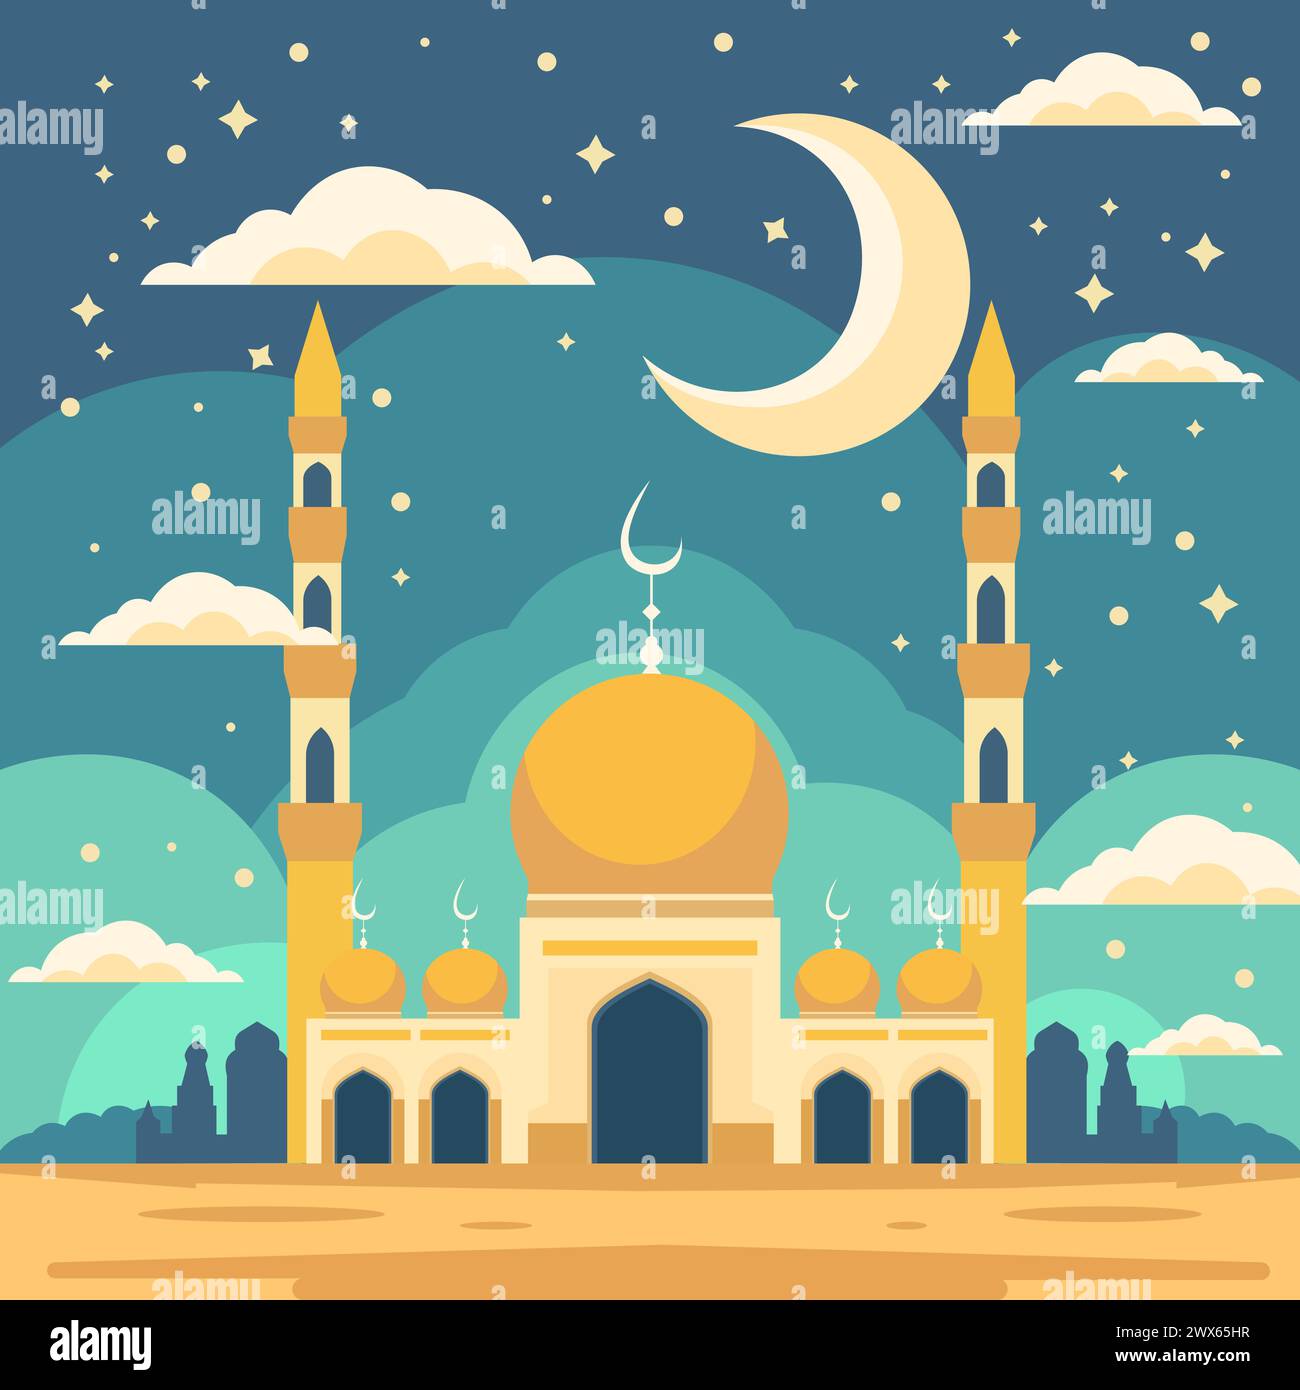 Mosque and Big Crescent Moon at Night Sky Islamic Festival Card Stock Vector